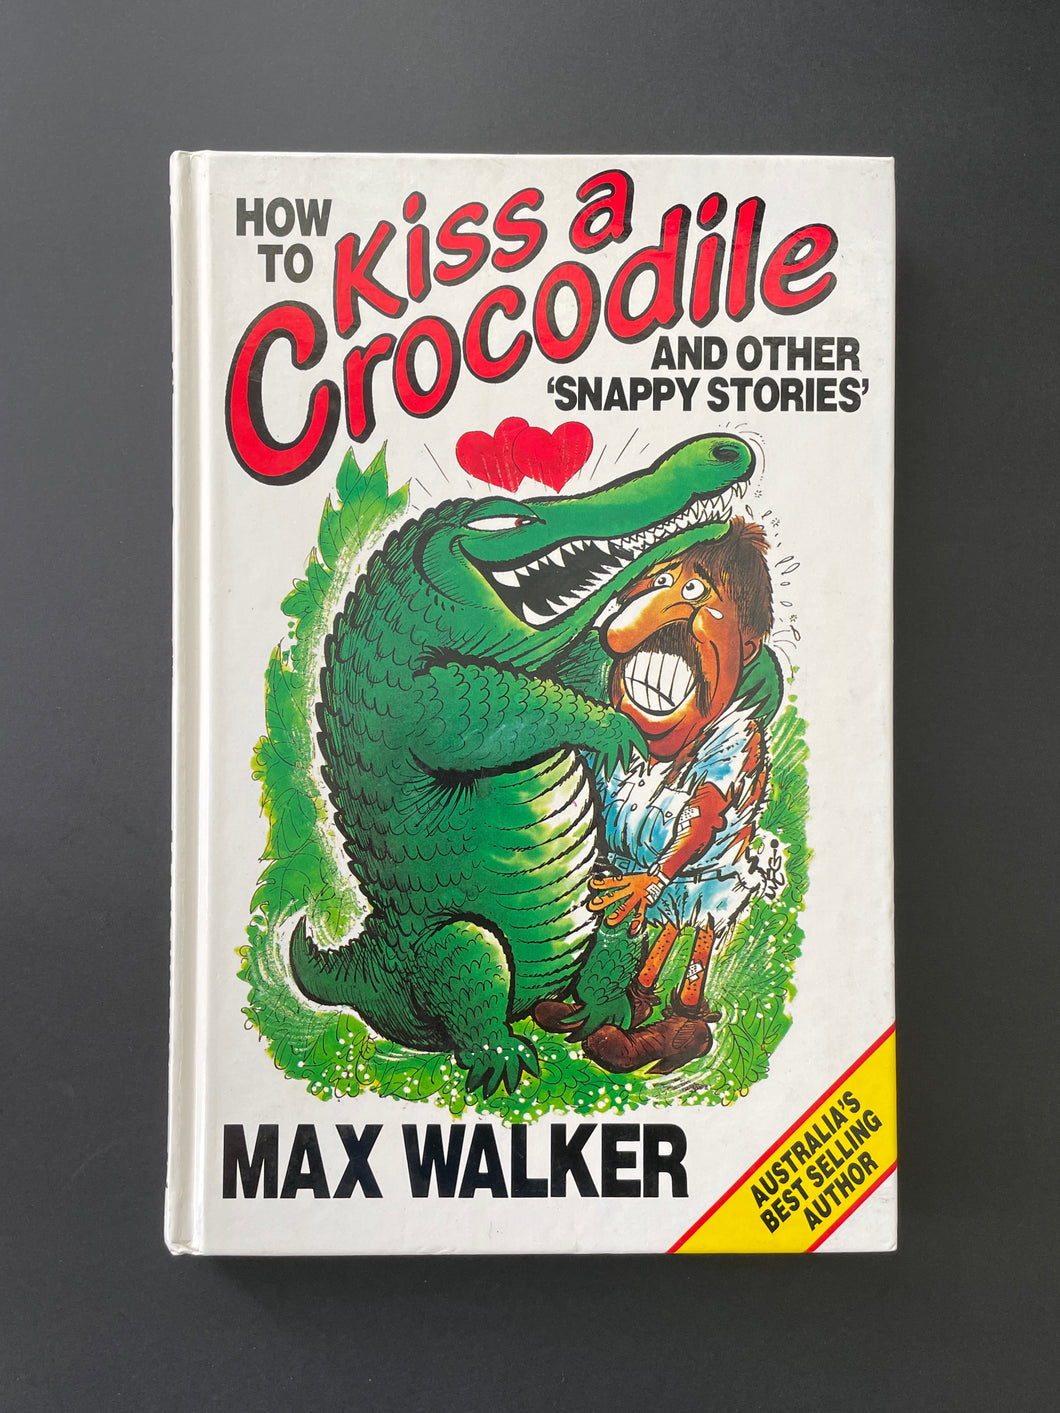 How to Kiss a Crocodile by Max Walker: photo of the front cover which shows very minor scuff marks.